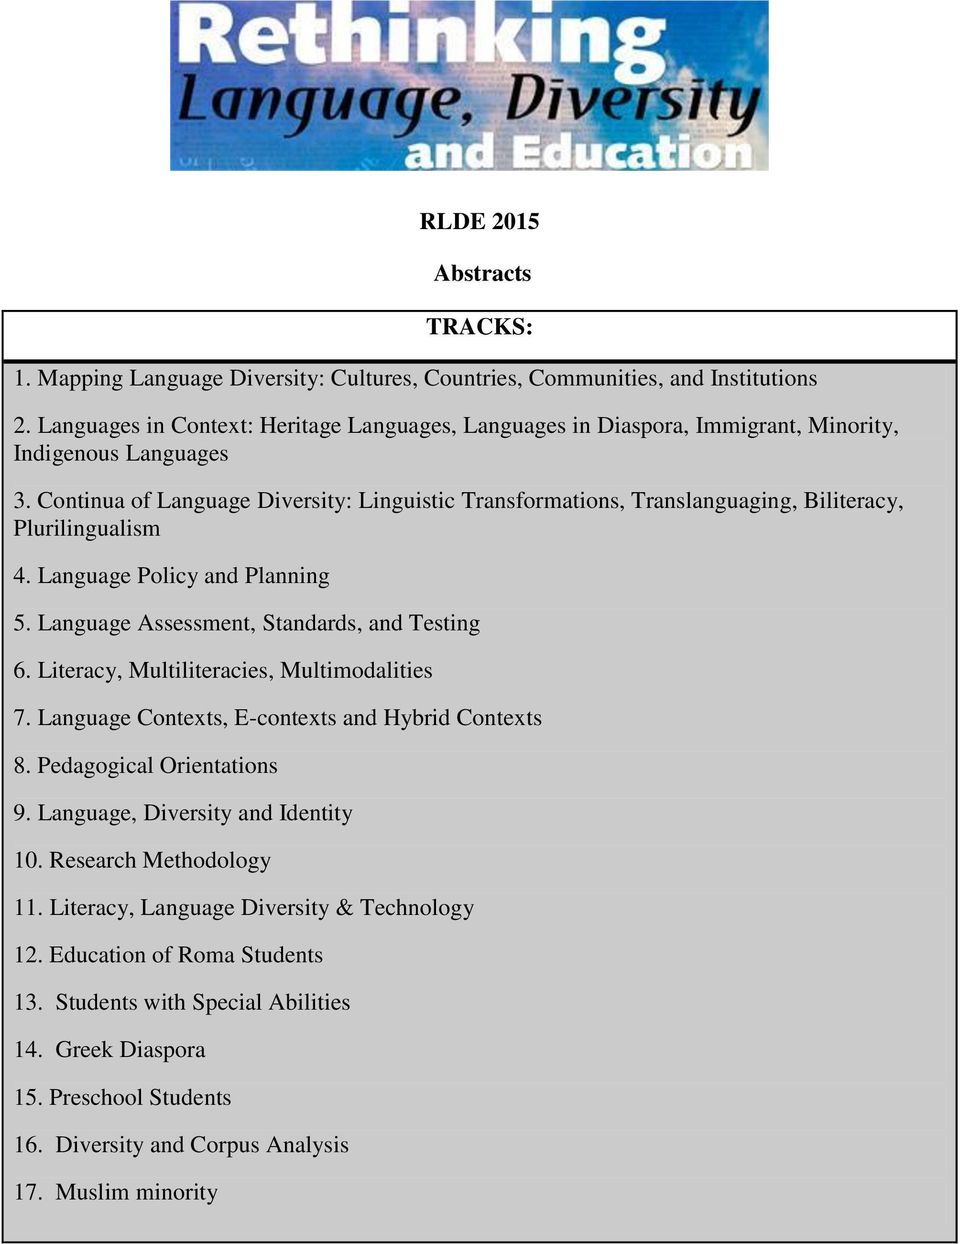 Continua of Language Diversity: Linguistic Transformations, Translanguaging, Biliteracy, Plurilingualism 4. Language Policy and Planning 5. Language Assessment, Standards, and Testing 6.